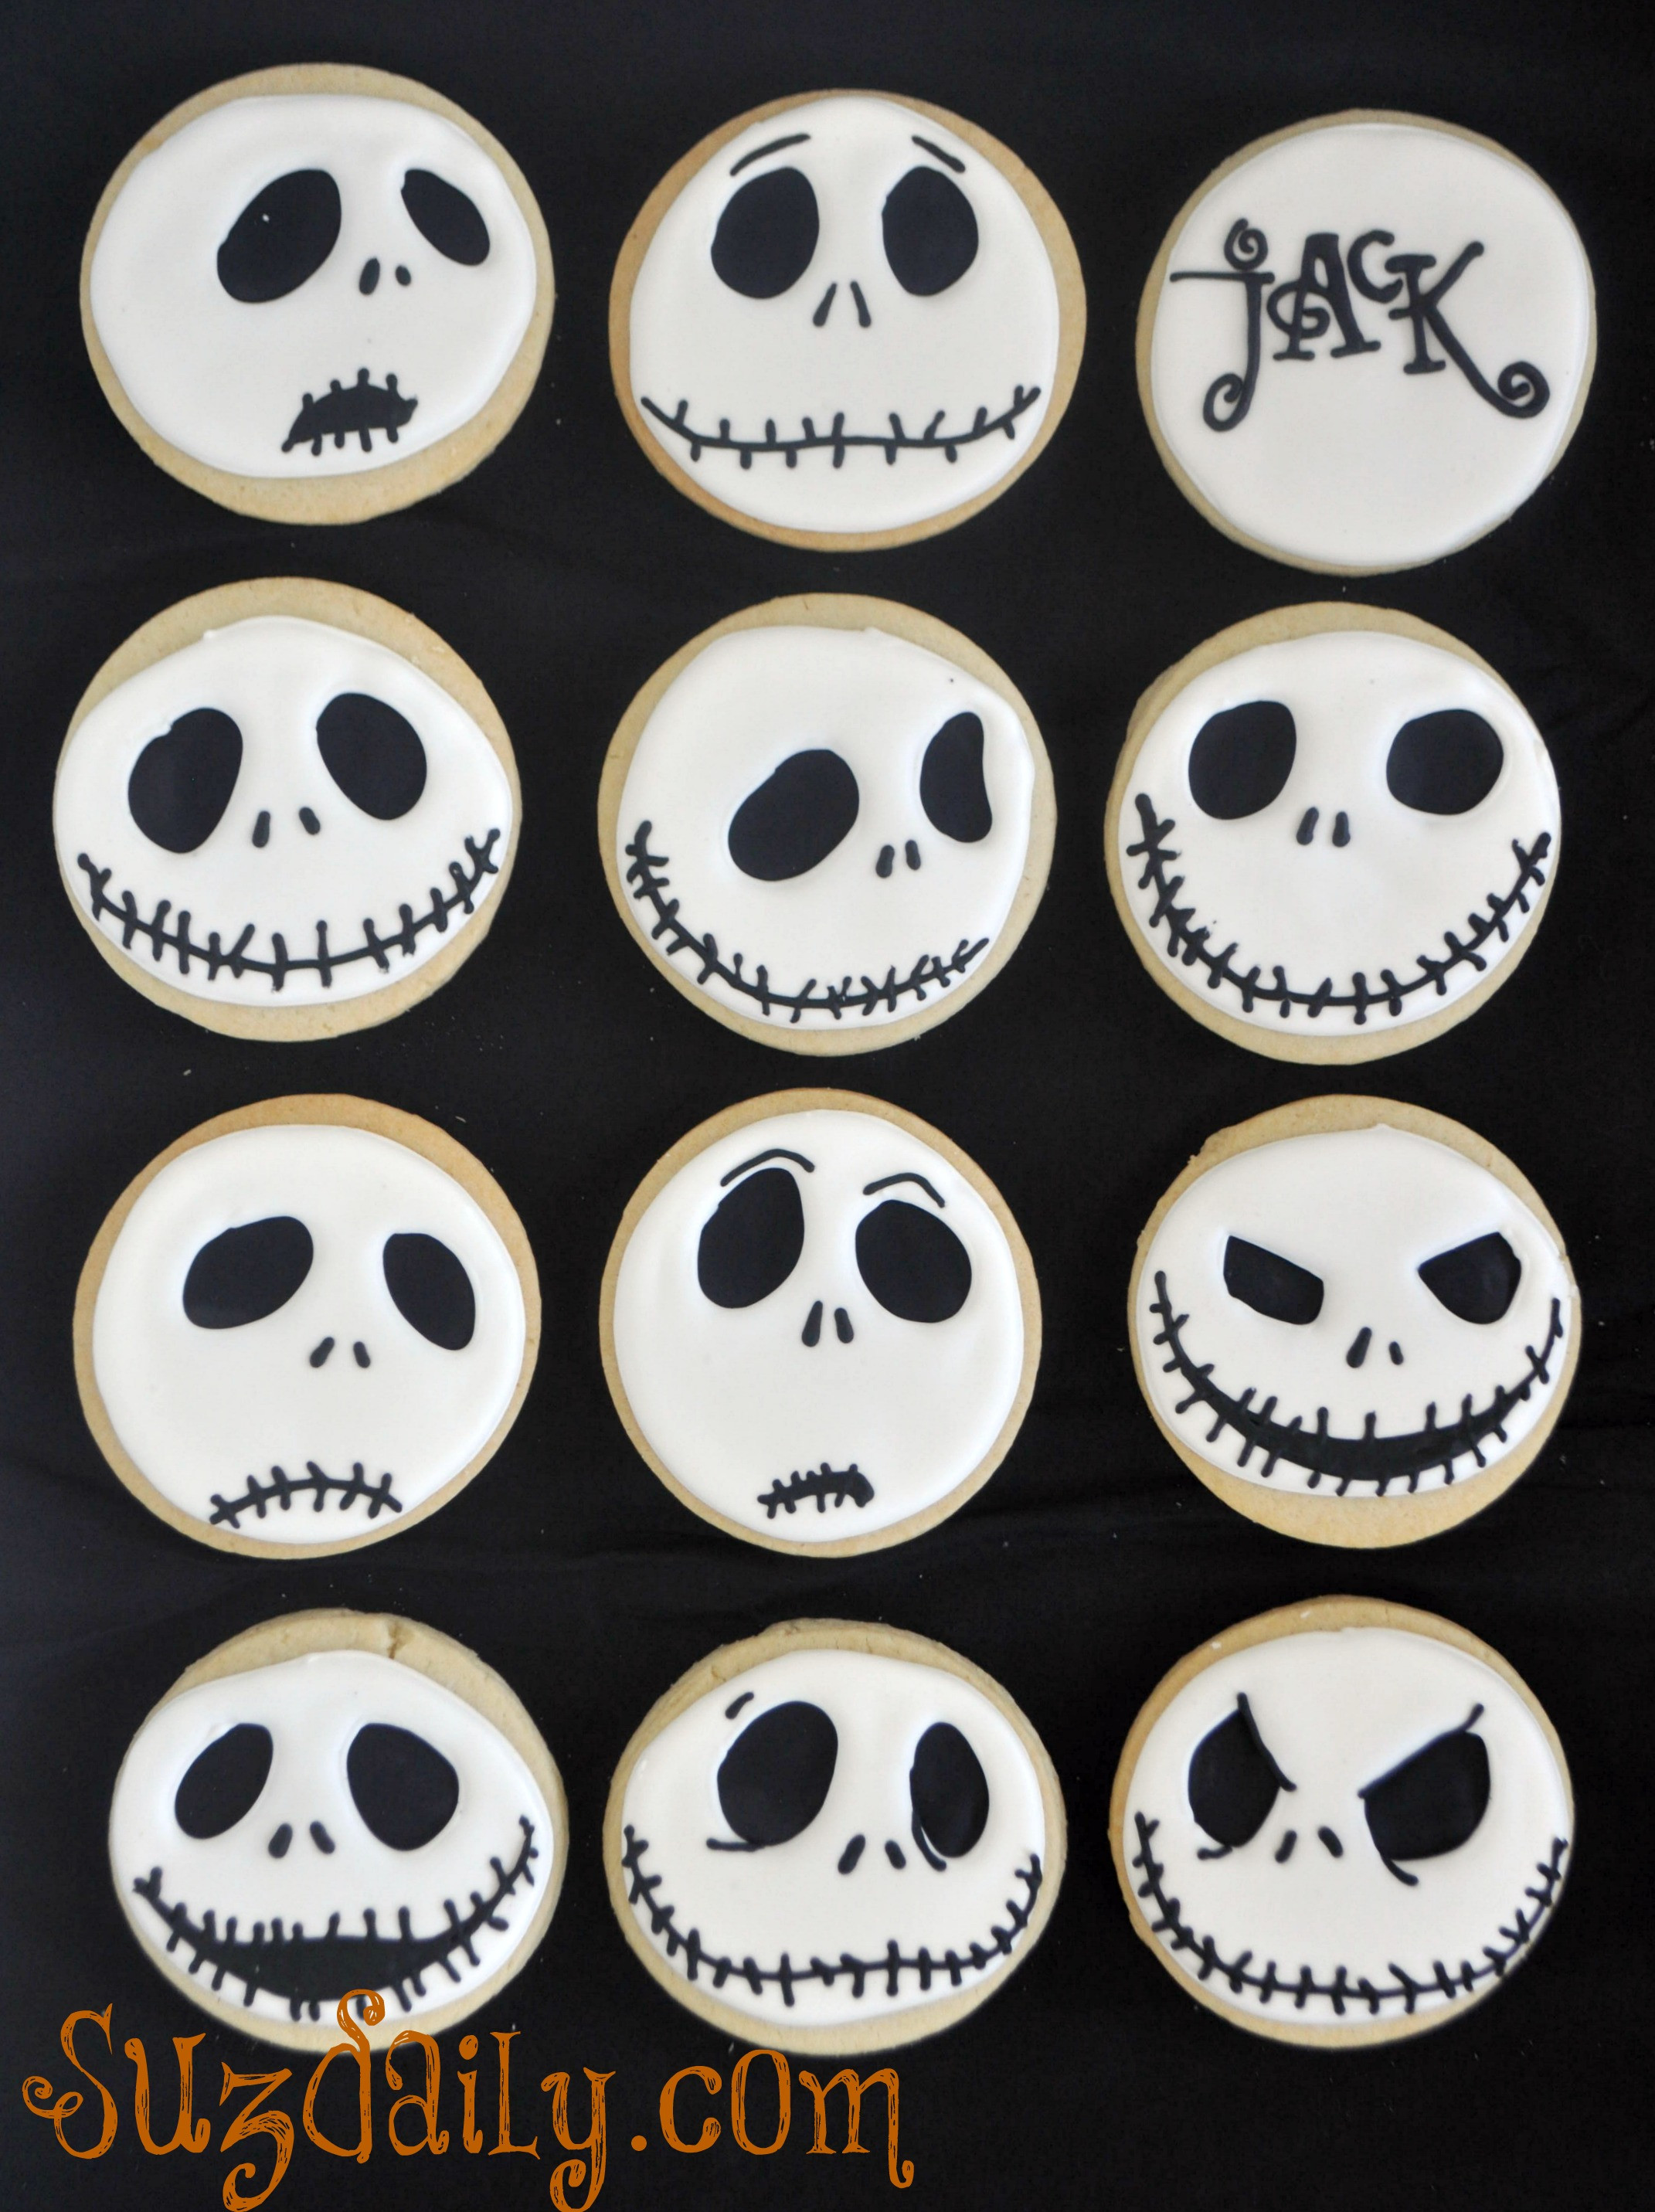 Nightmare Before Christmas Cookies
 How to make a Jack Skellington Cookie – How to make a